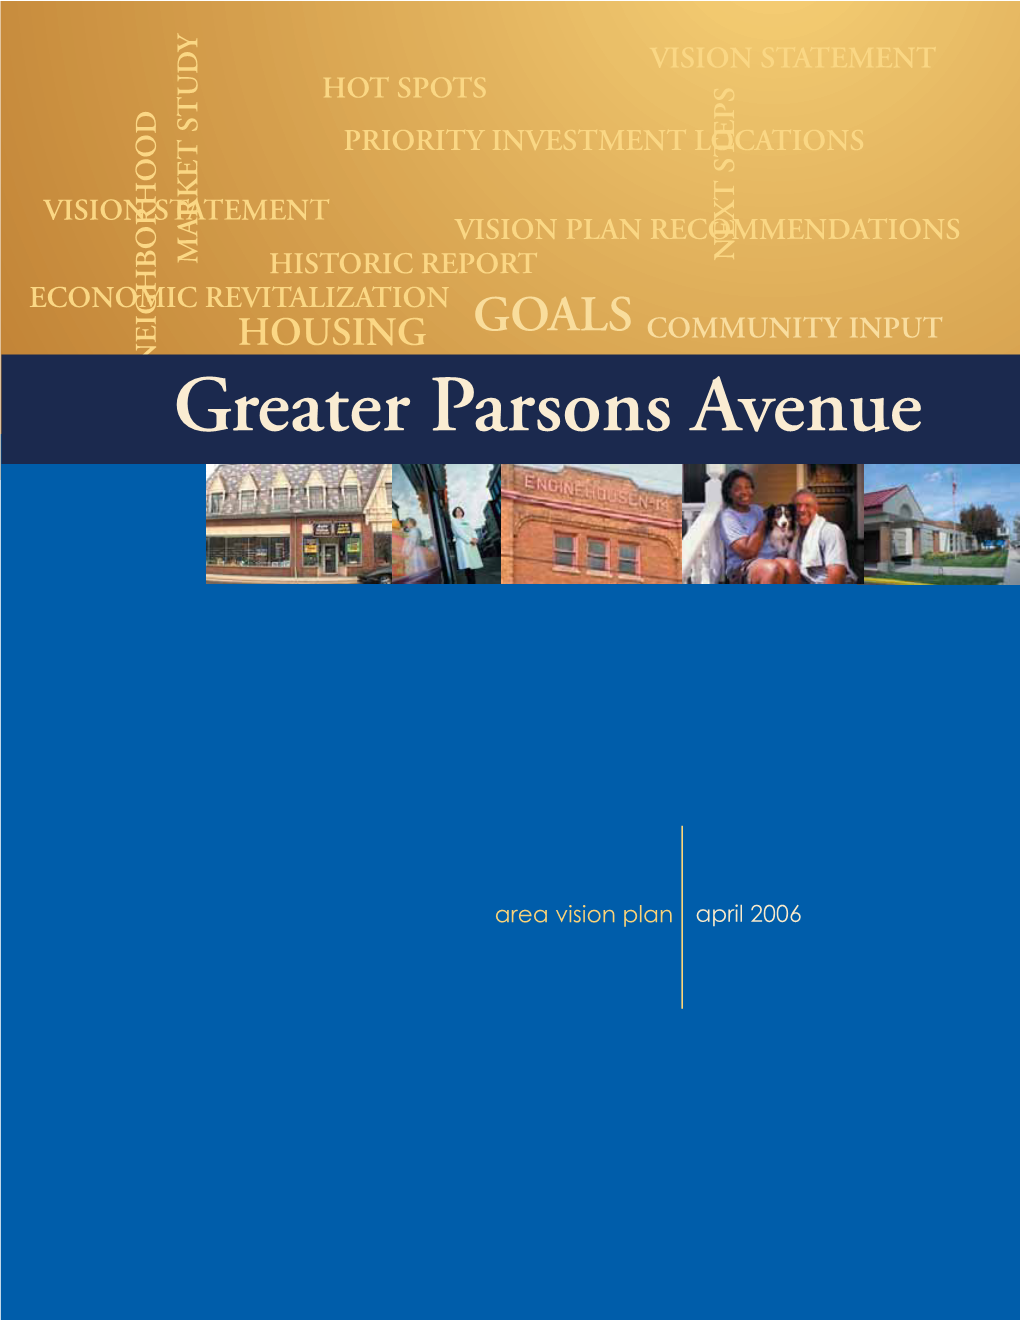 Greater Parsons Avenue Area Vision Plan